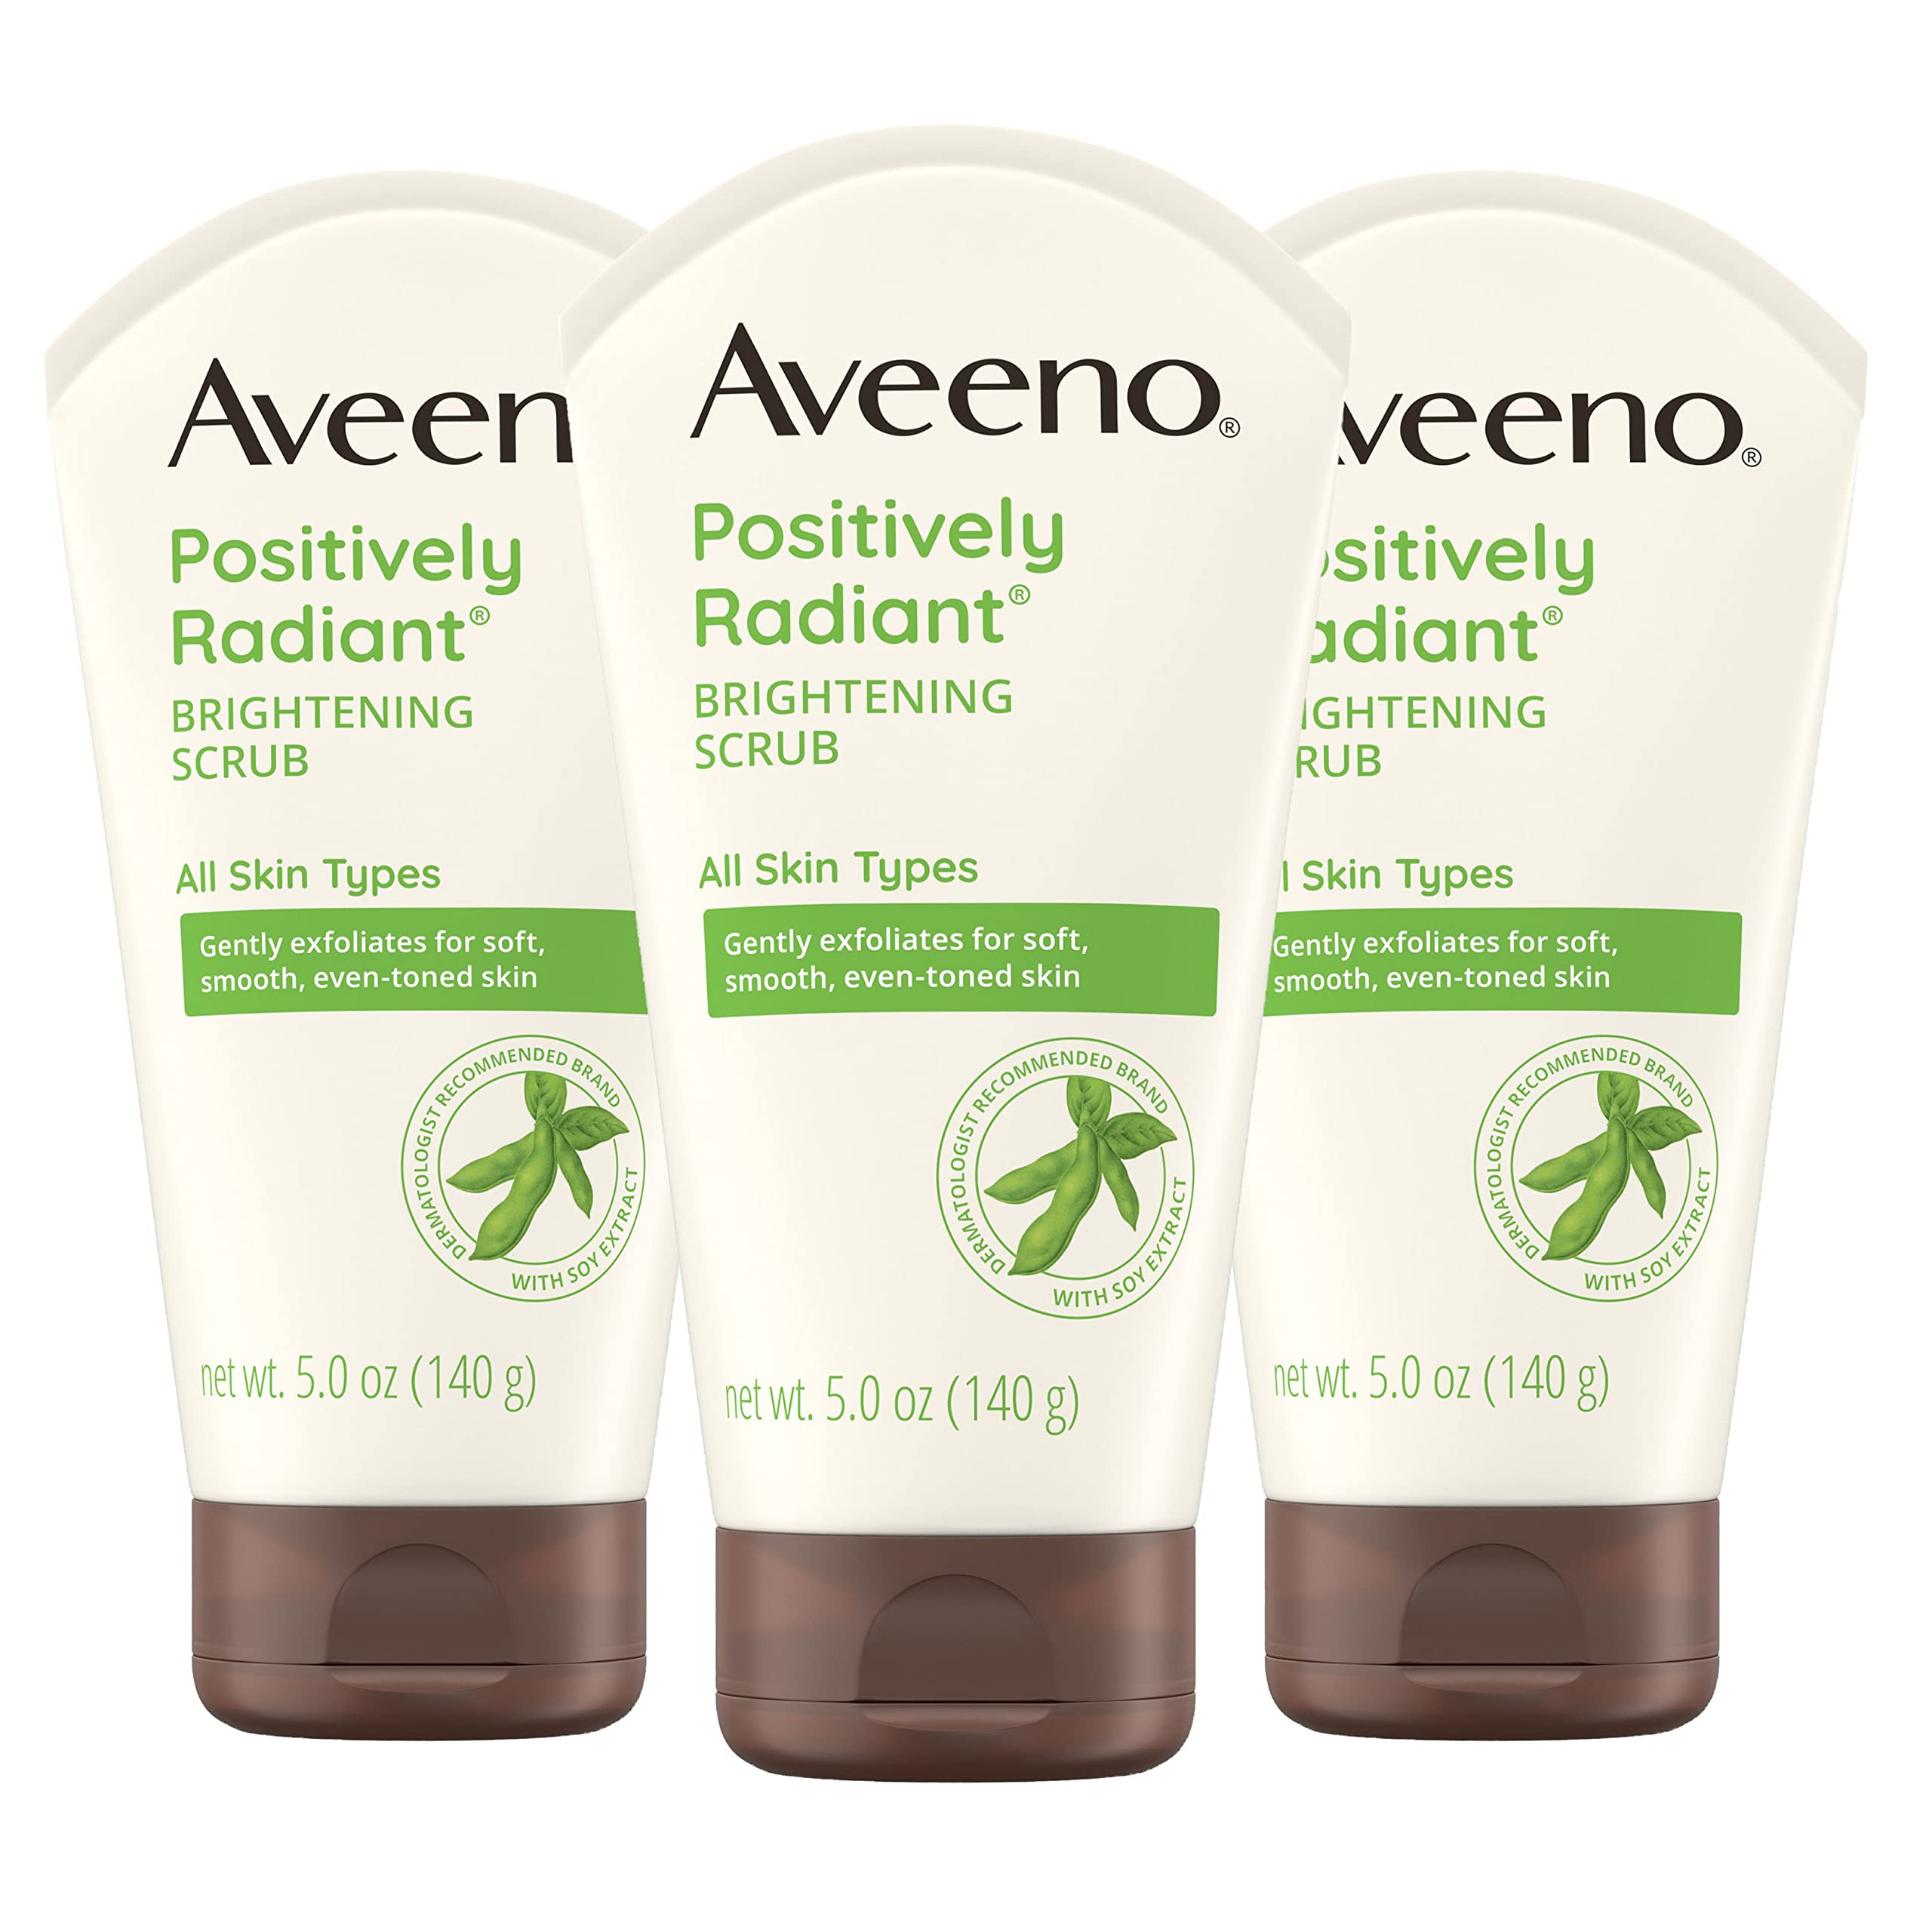 Aveeno Daily Moisturizing Facial Cleanser with Soothing Non-GMO Oat, Hydrating Face Washfor Soft & Supple Skin, Free of Parabens, Sulfates, Fragrance, Dyes & Soaps, 5 fl. oz, Pack of 3